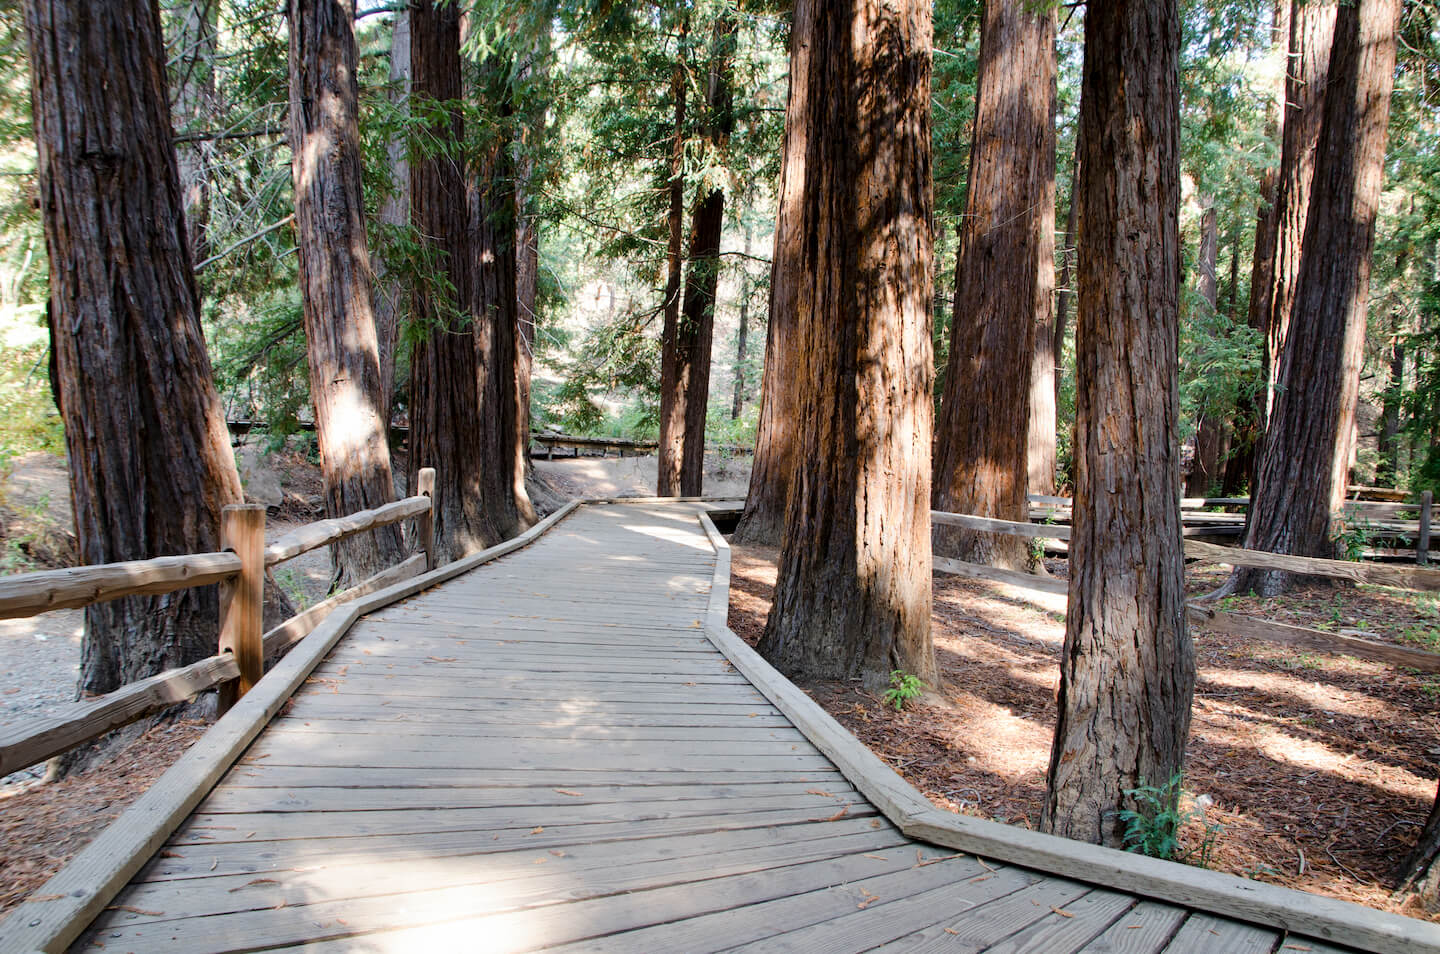 Photo of a path in a redwood forest